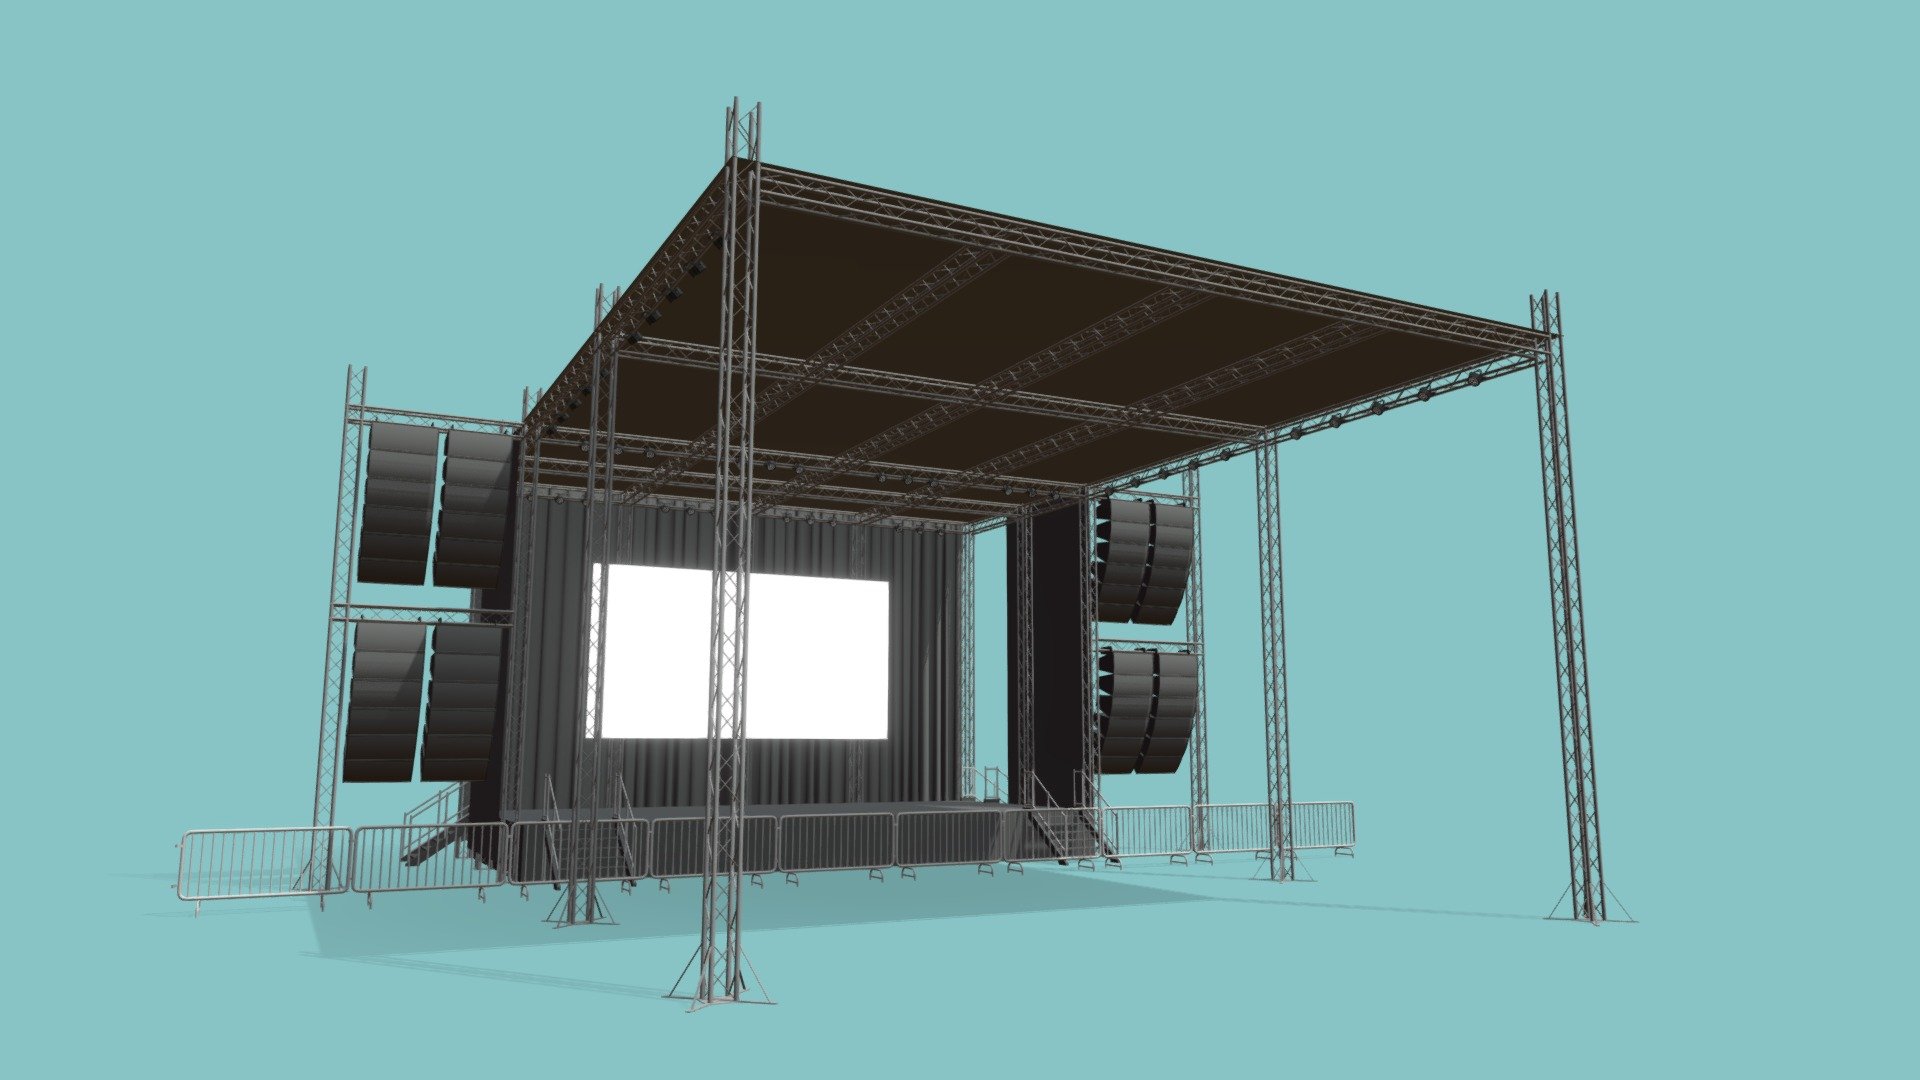 Concert Stage 5

Measurements:


Platform is: L: 12m, W: 6m, H: 1m
Inner height: 7m
Total height from bottom to top: 9m
Front Extension is: L: 12m, W: 12m, H: 8m

IMPORTANT NOTES:


This model does not have textures or materials, but it has separate generic materials, it is also separated into parts, so you can easily assign your own materials.

If you have any doubts or questions about this model, you can send us a message 3d model